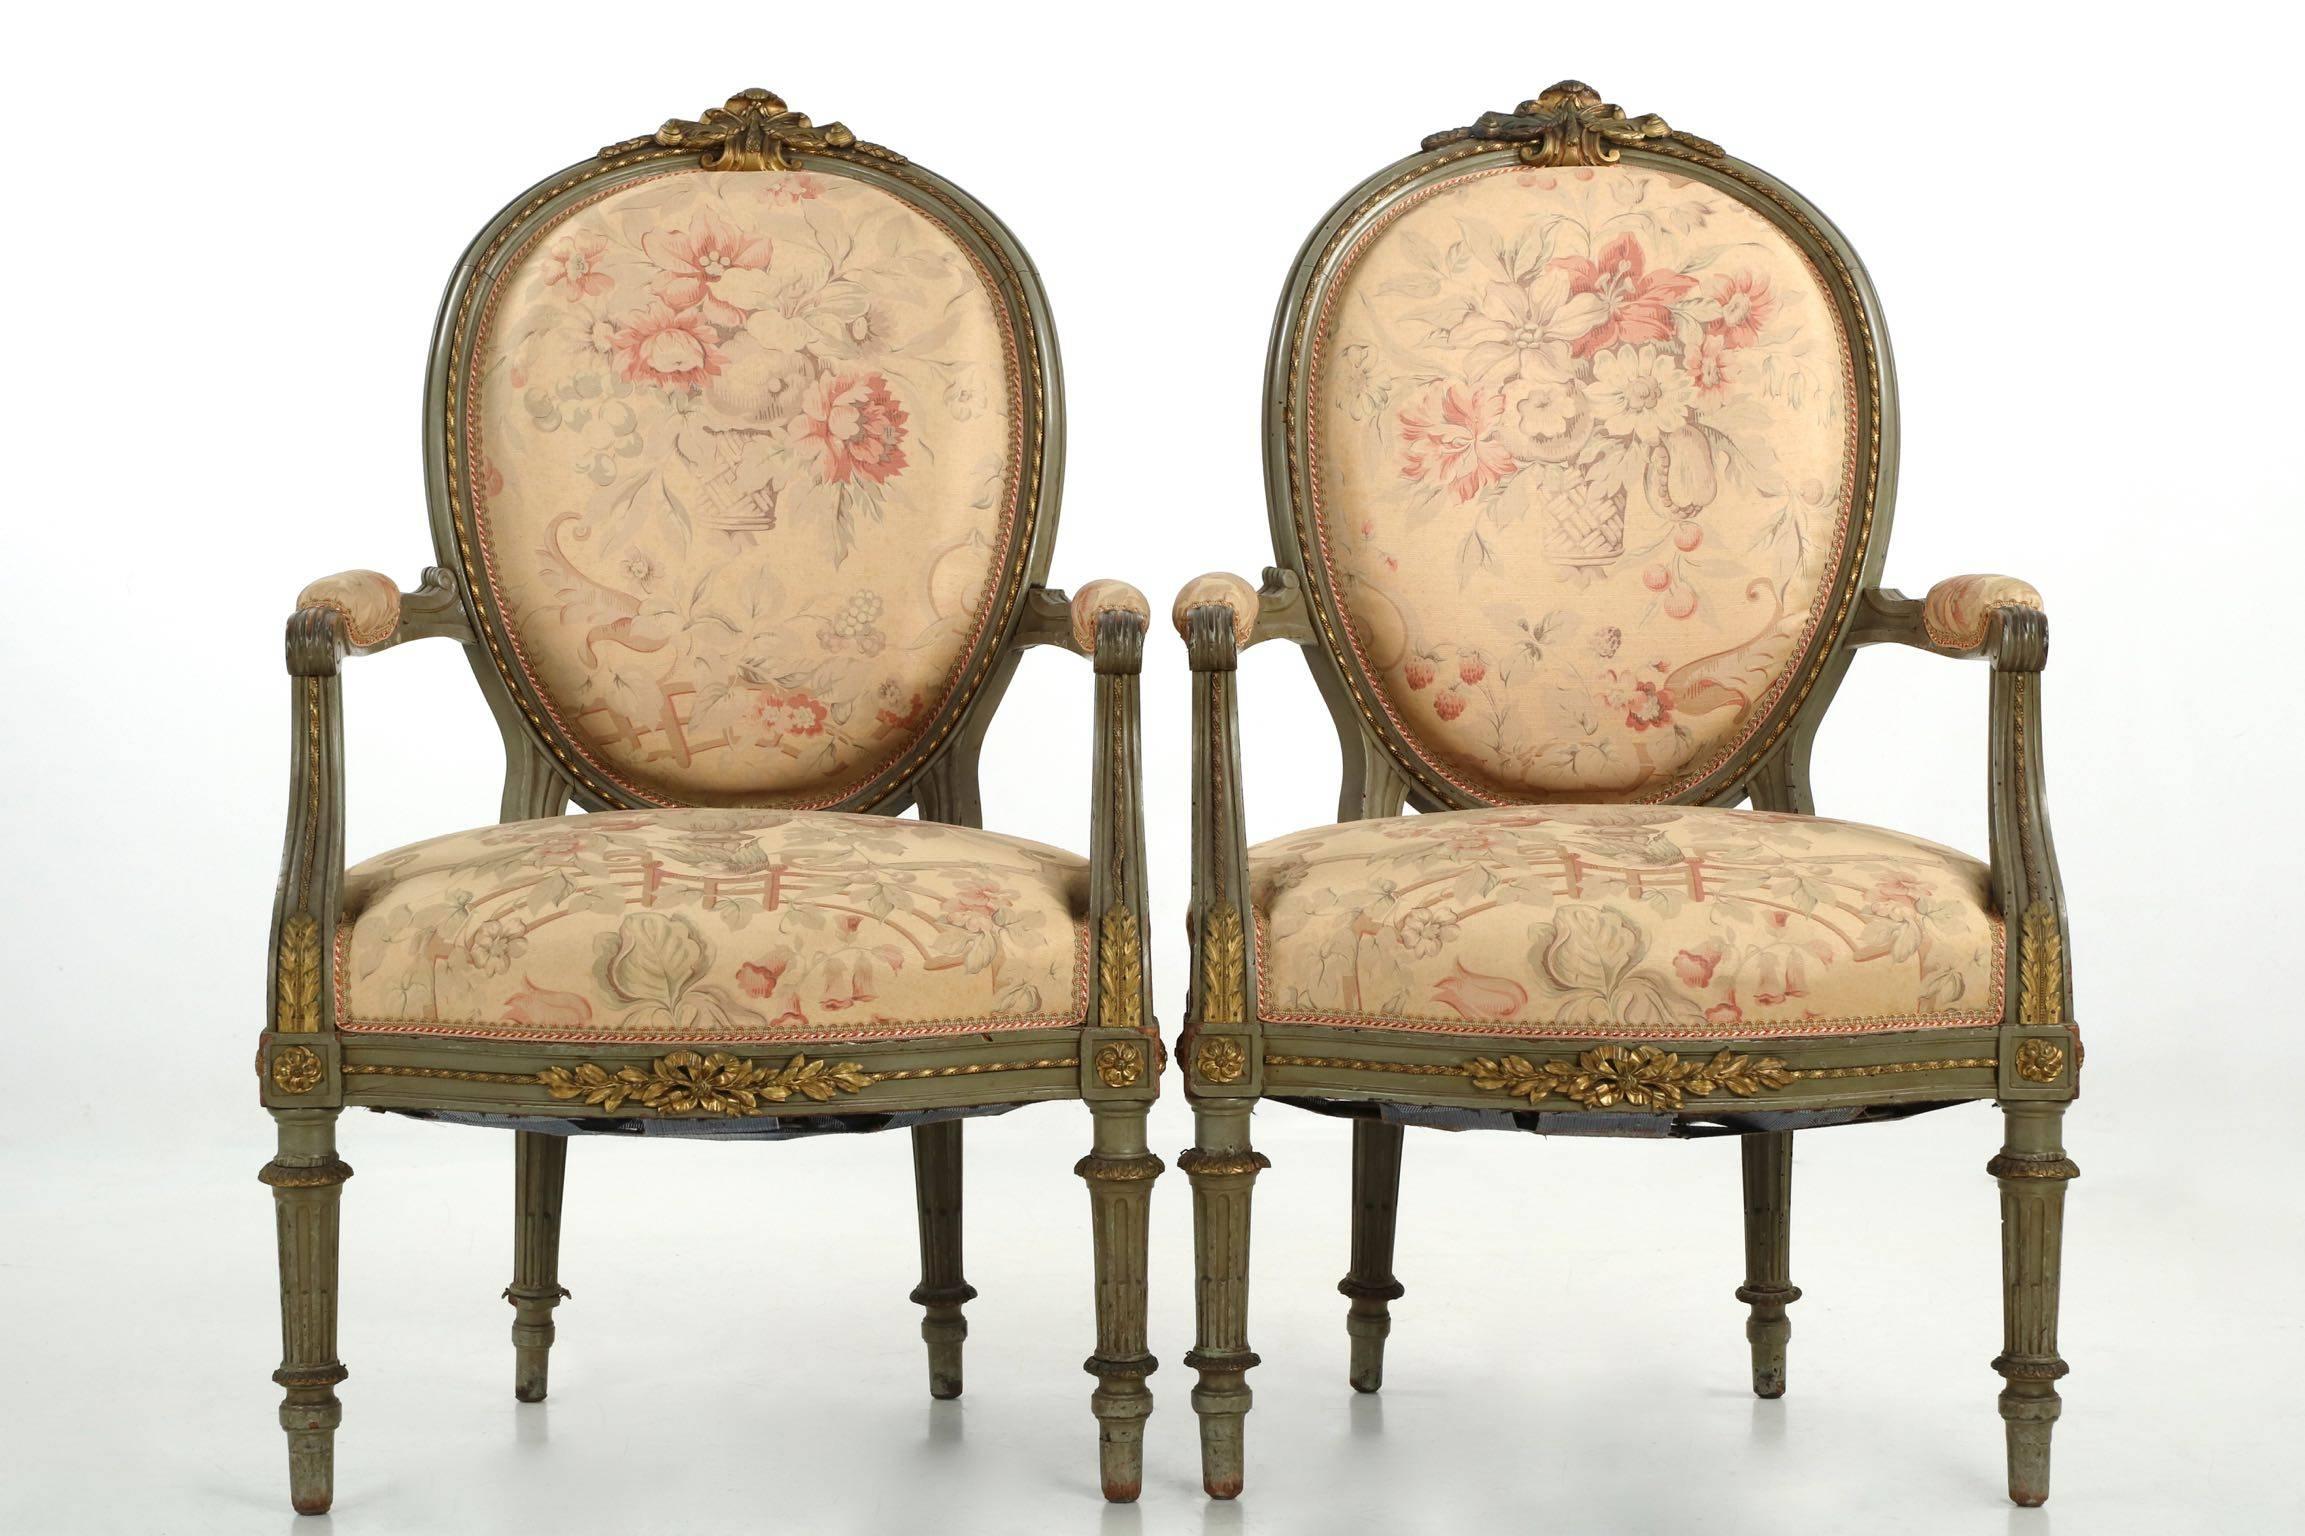 A quite nice Louis XVI style salon suite with what appears to be it’s original polychromed green surface, the chairs are extensively embellished with beautiful gilt metal mounts in the Napoleon III taste. Several chair crest mounts have old foundry